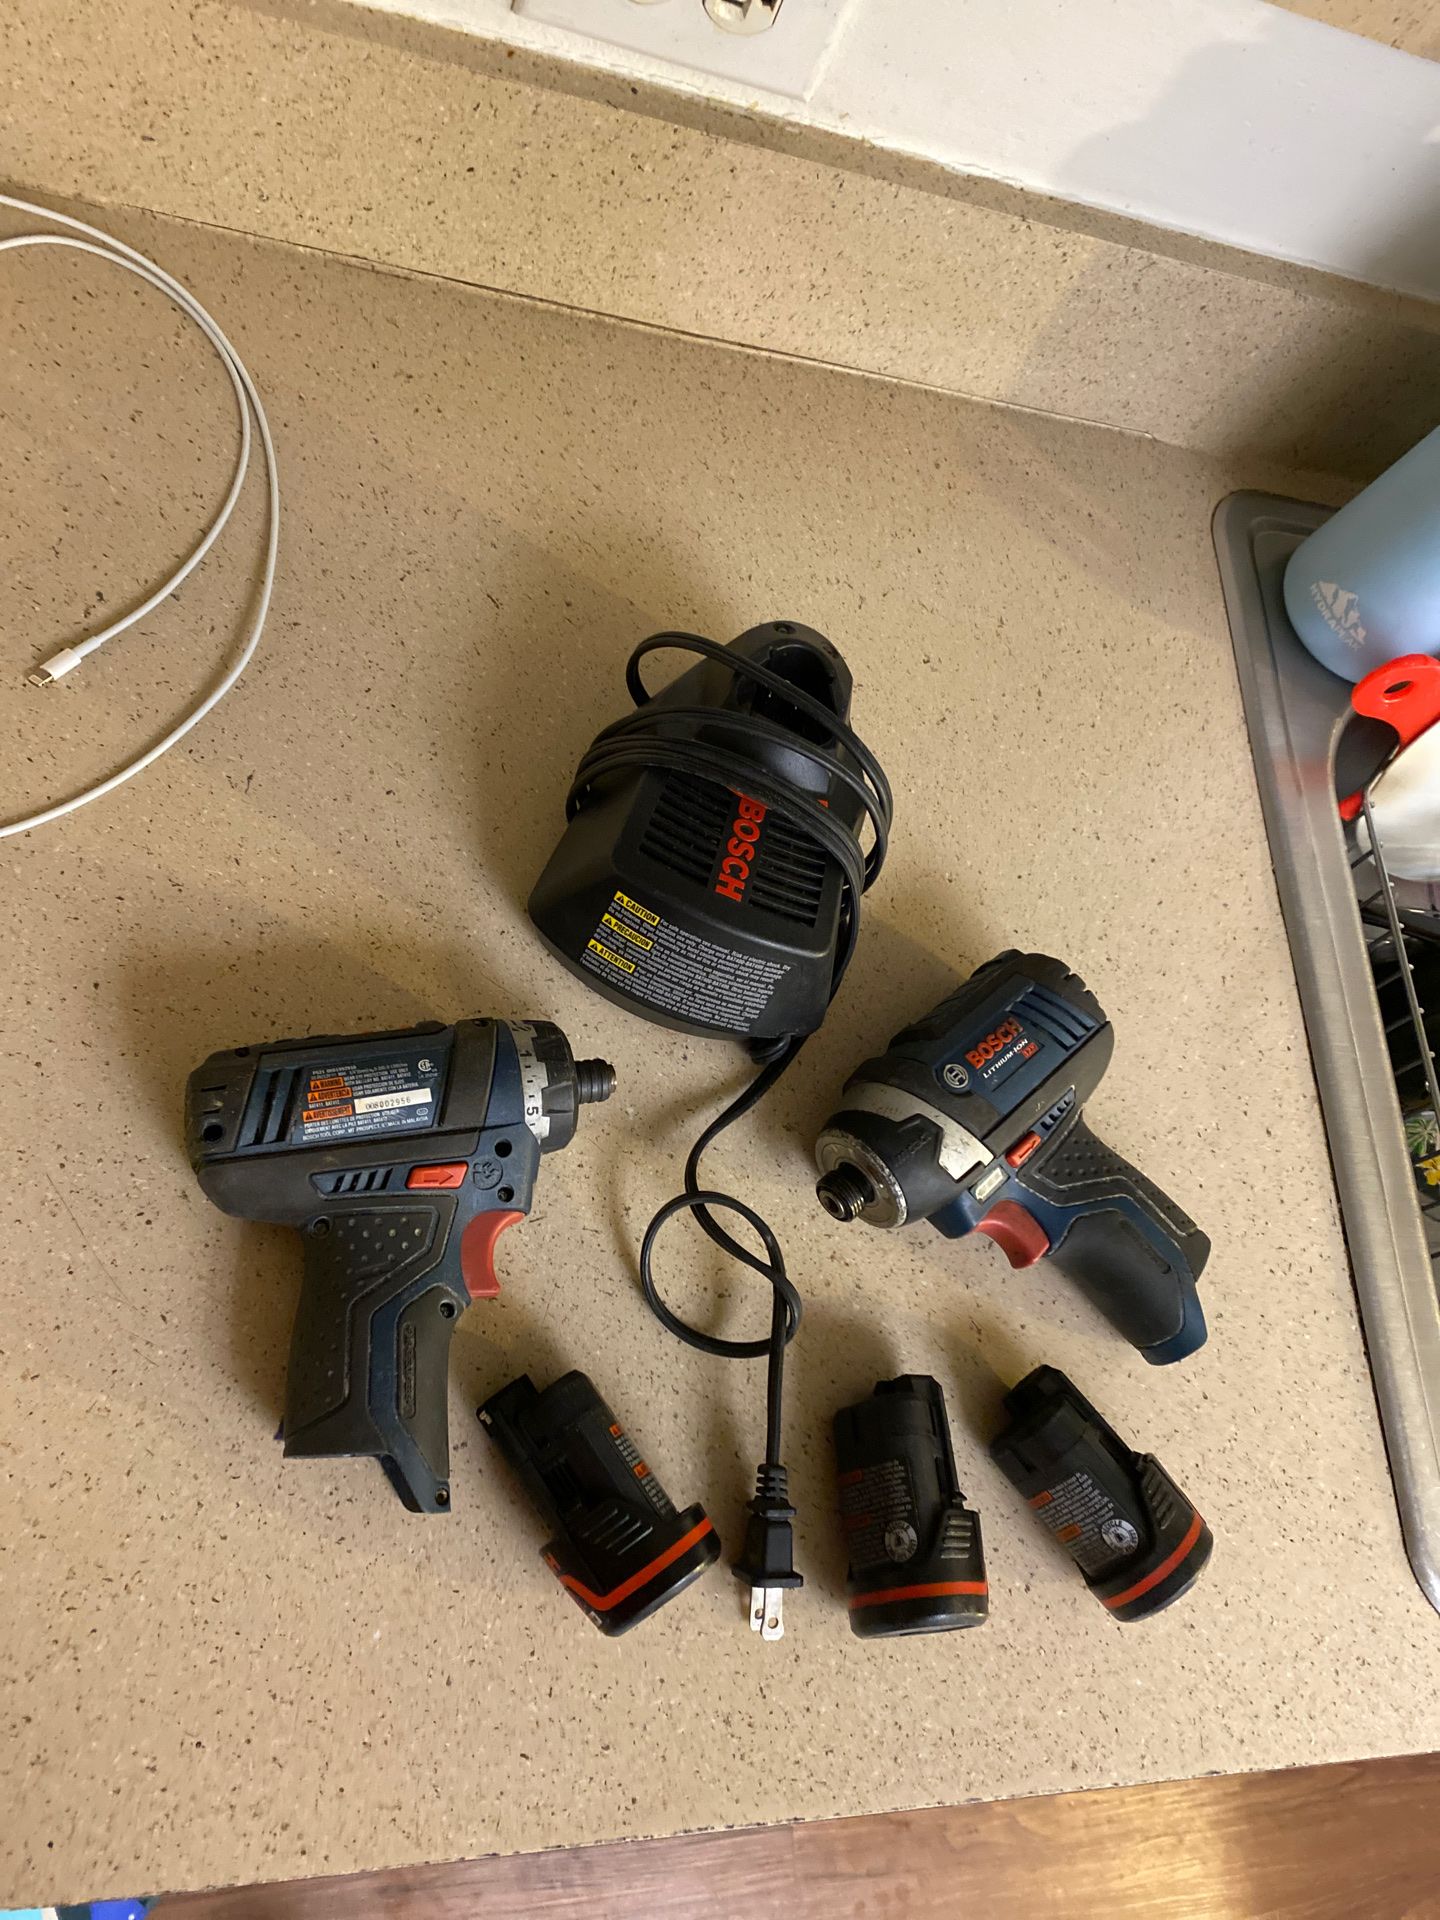 Bosch set of drill with battery and charger